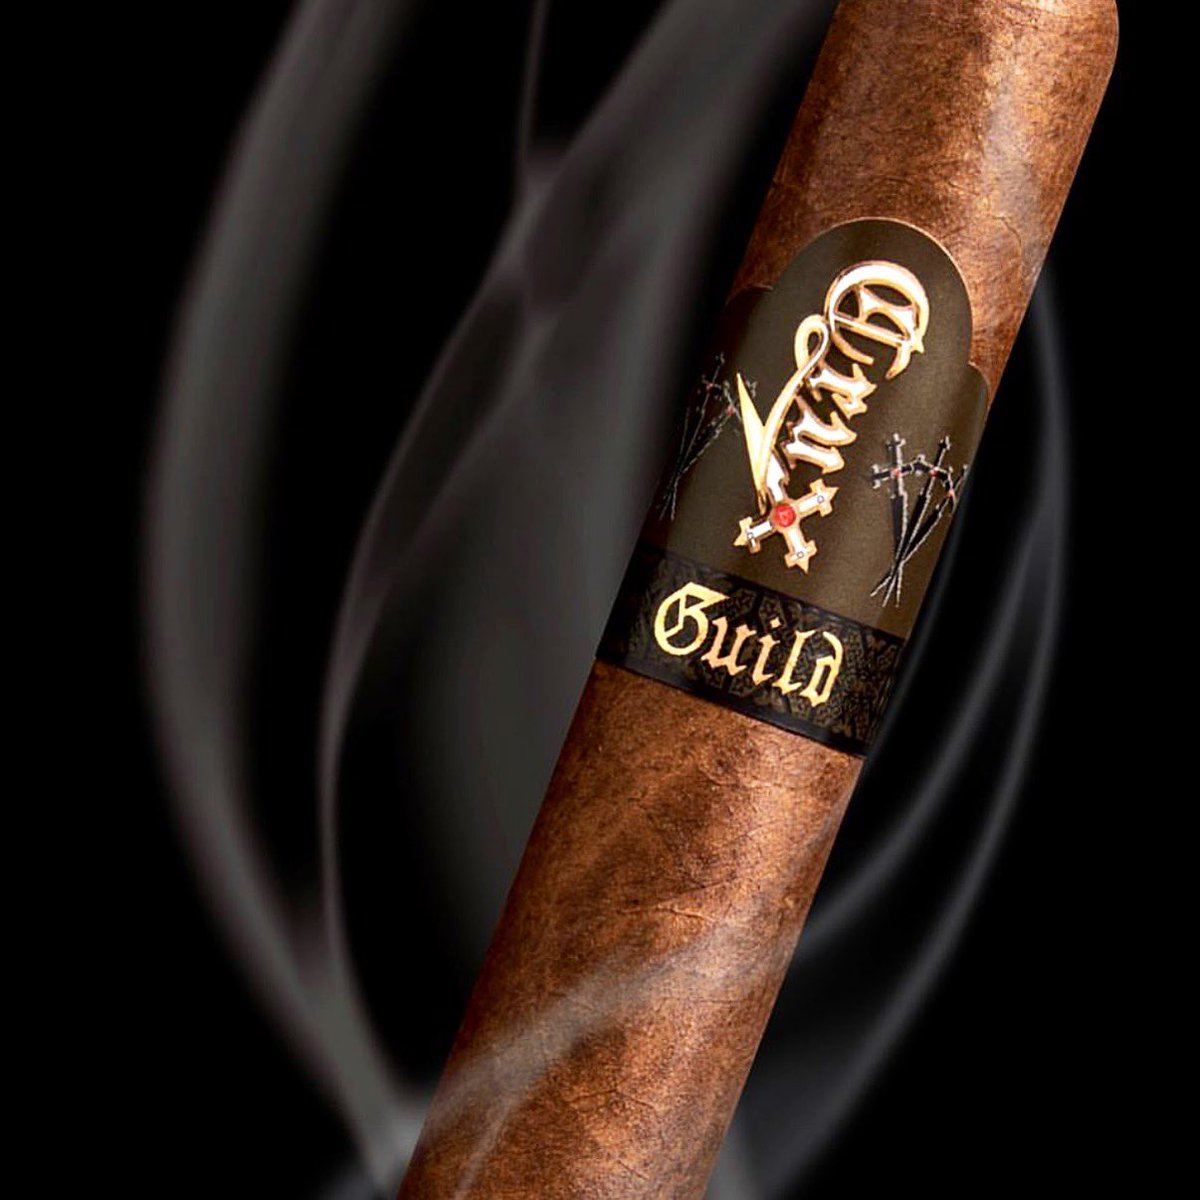 The #cruxcigars #limitadaredline and #epicureshortsalomone might be the new kids on the block, but don’t forget about the #cruxguild, our most full-bodied blend! Try all of them for yourself at one of our #cruxretailpartners around the country!  #gocruxyourself #hechoamamo